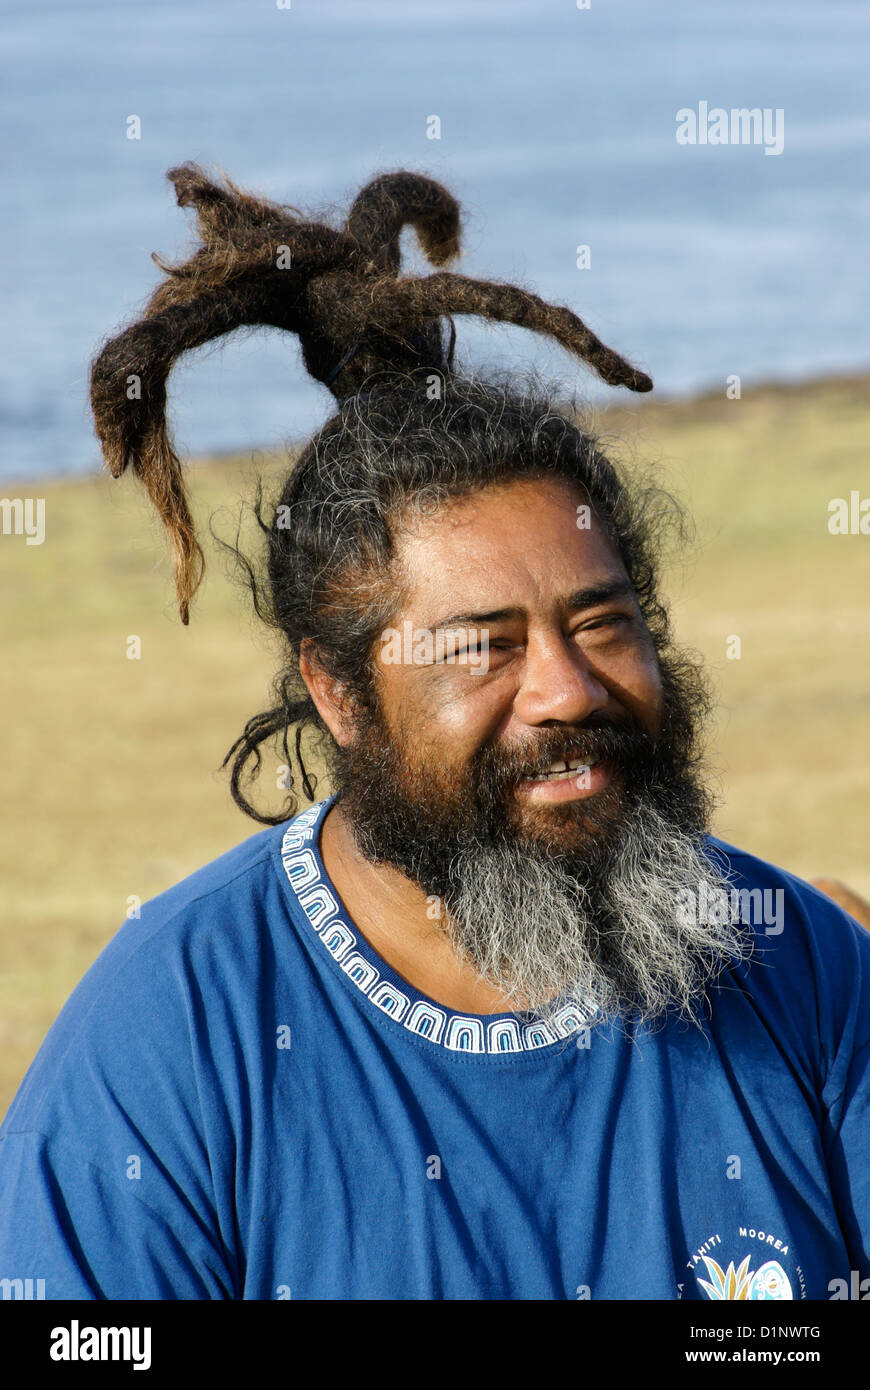 Rapanui man with braided hair, Easter Island, Chile Stock Photo